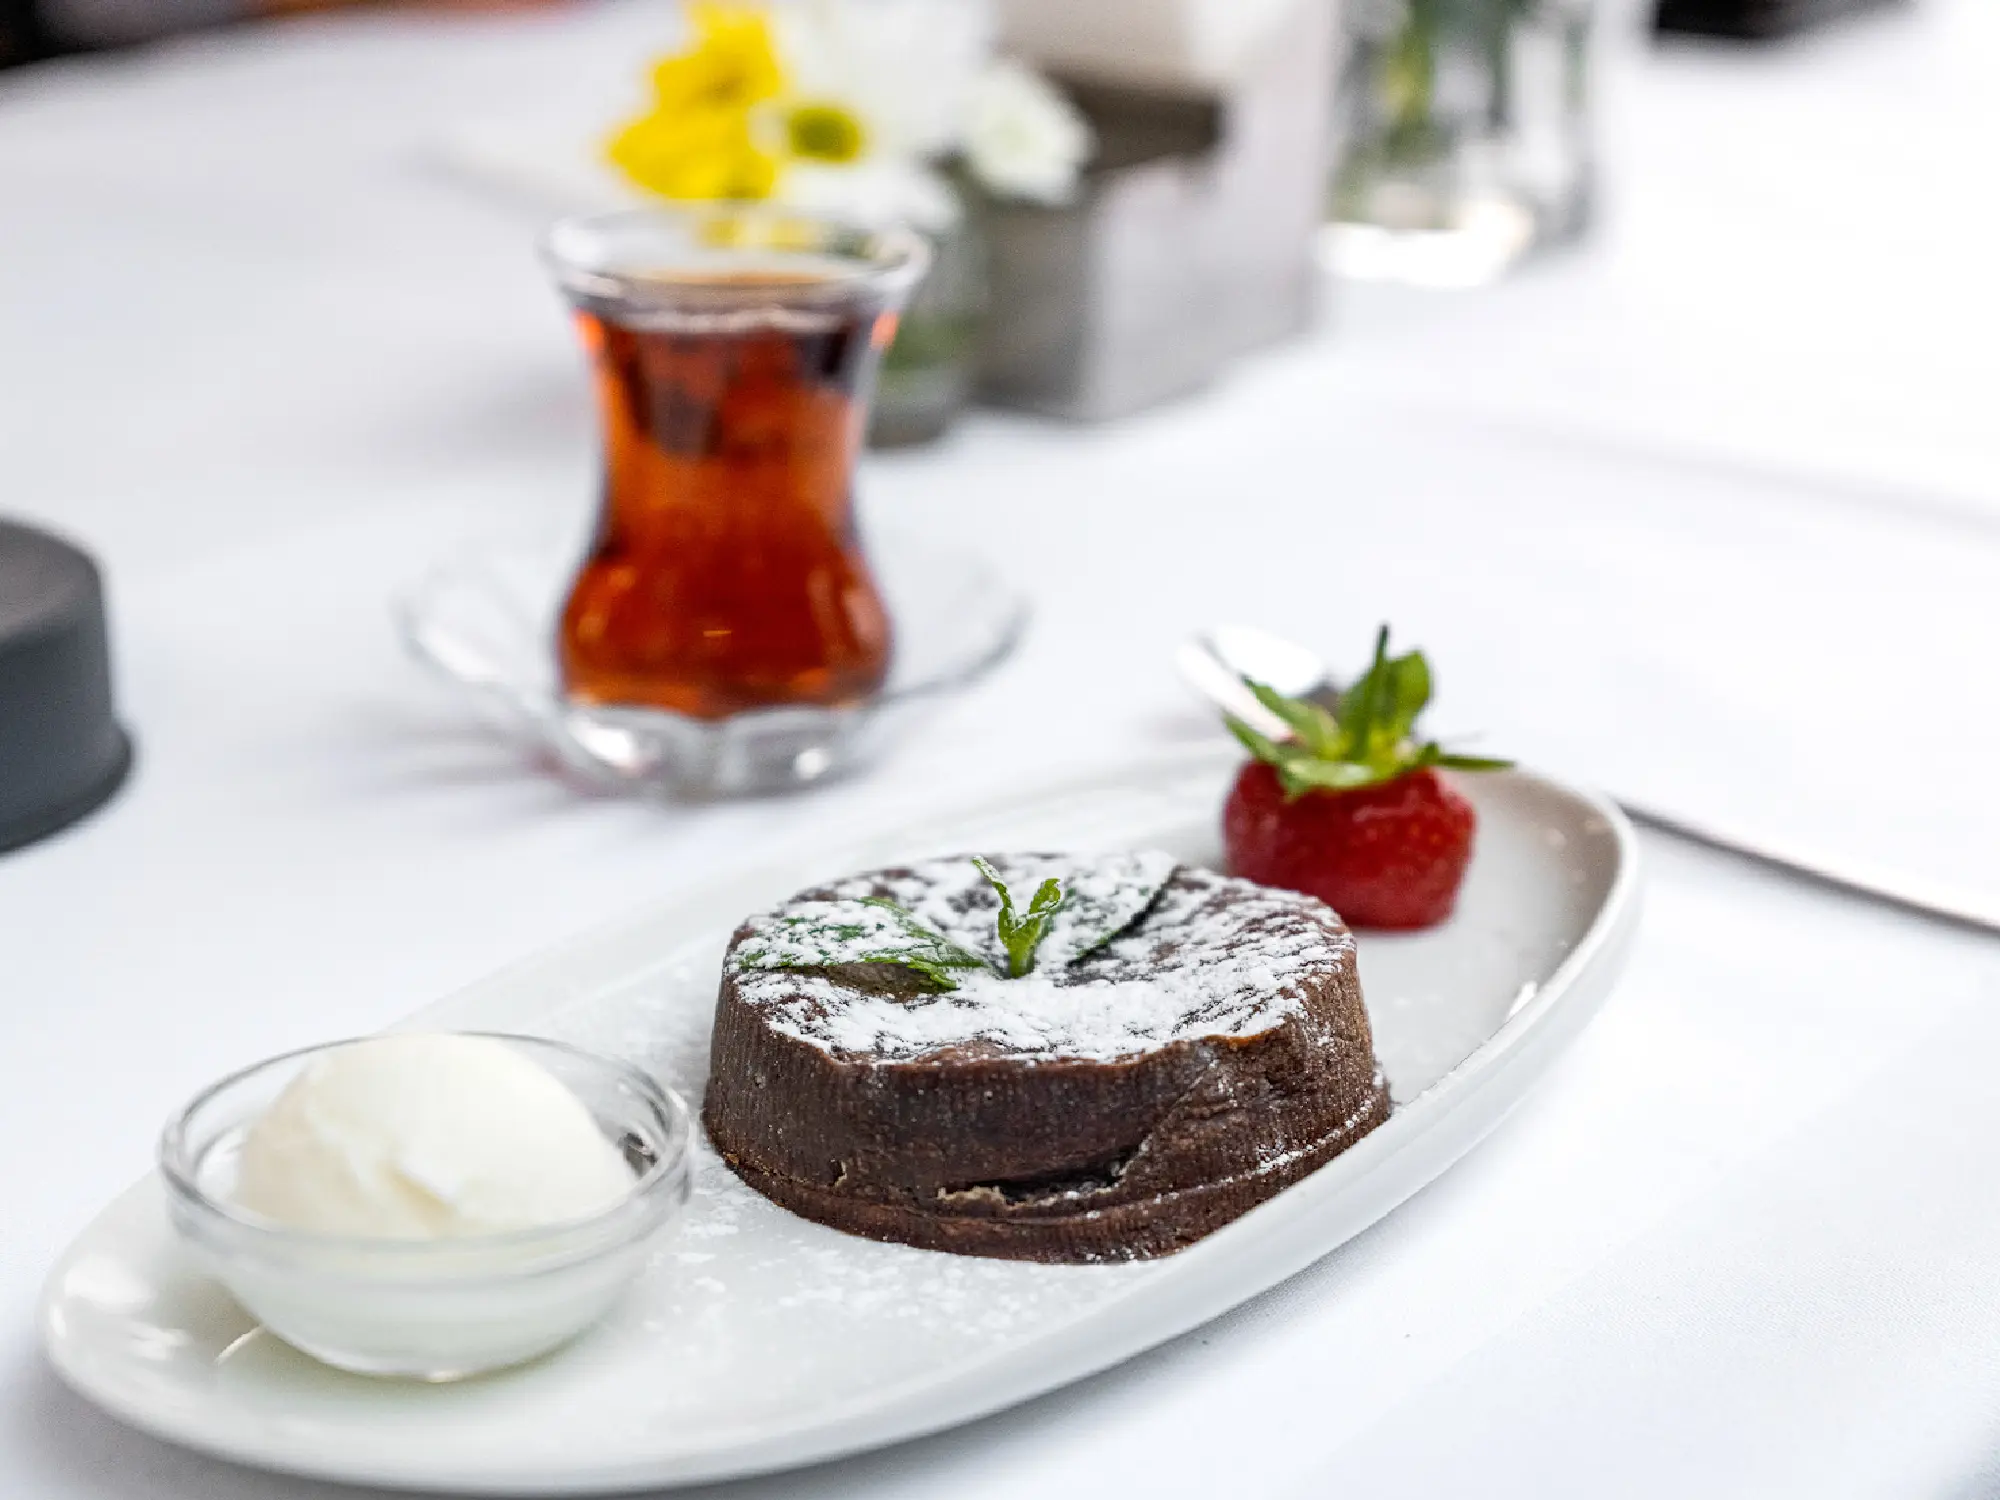 The desserts prepared by Litera's master chefs offer a feast of flavour.